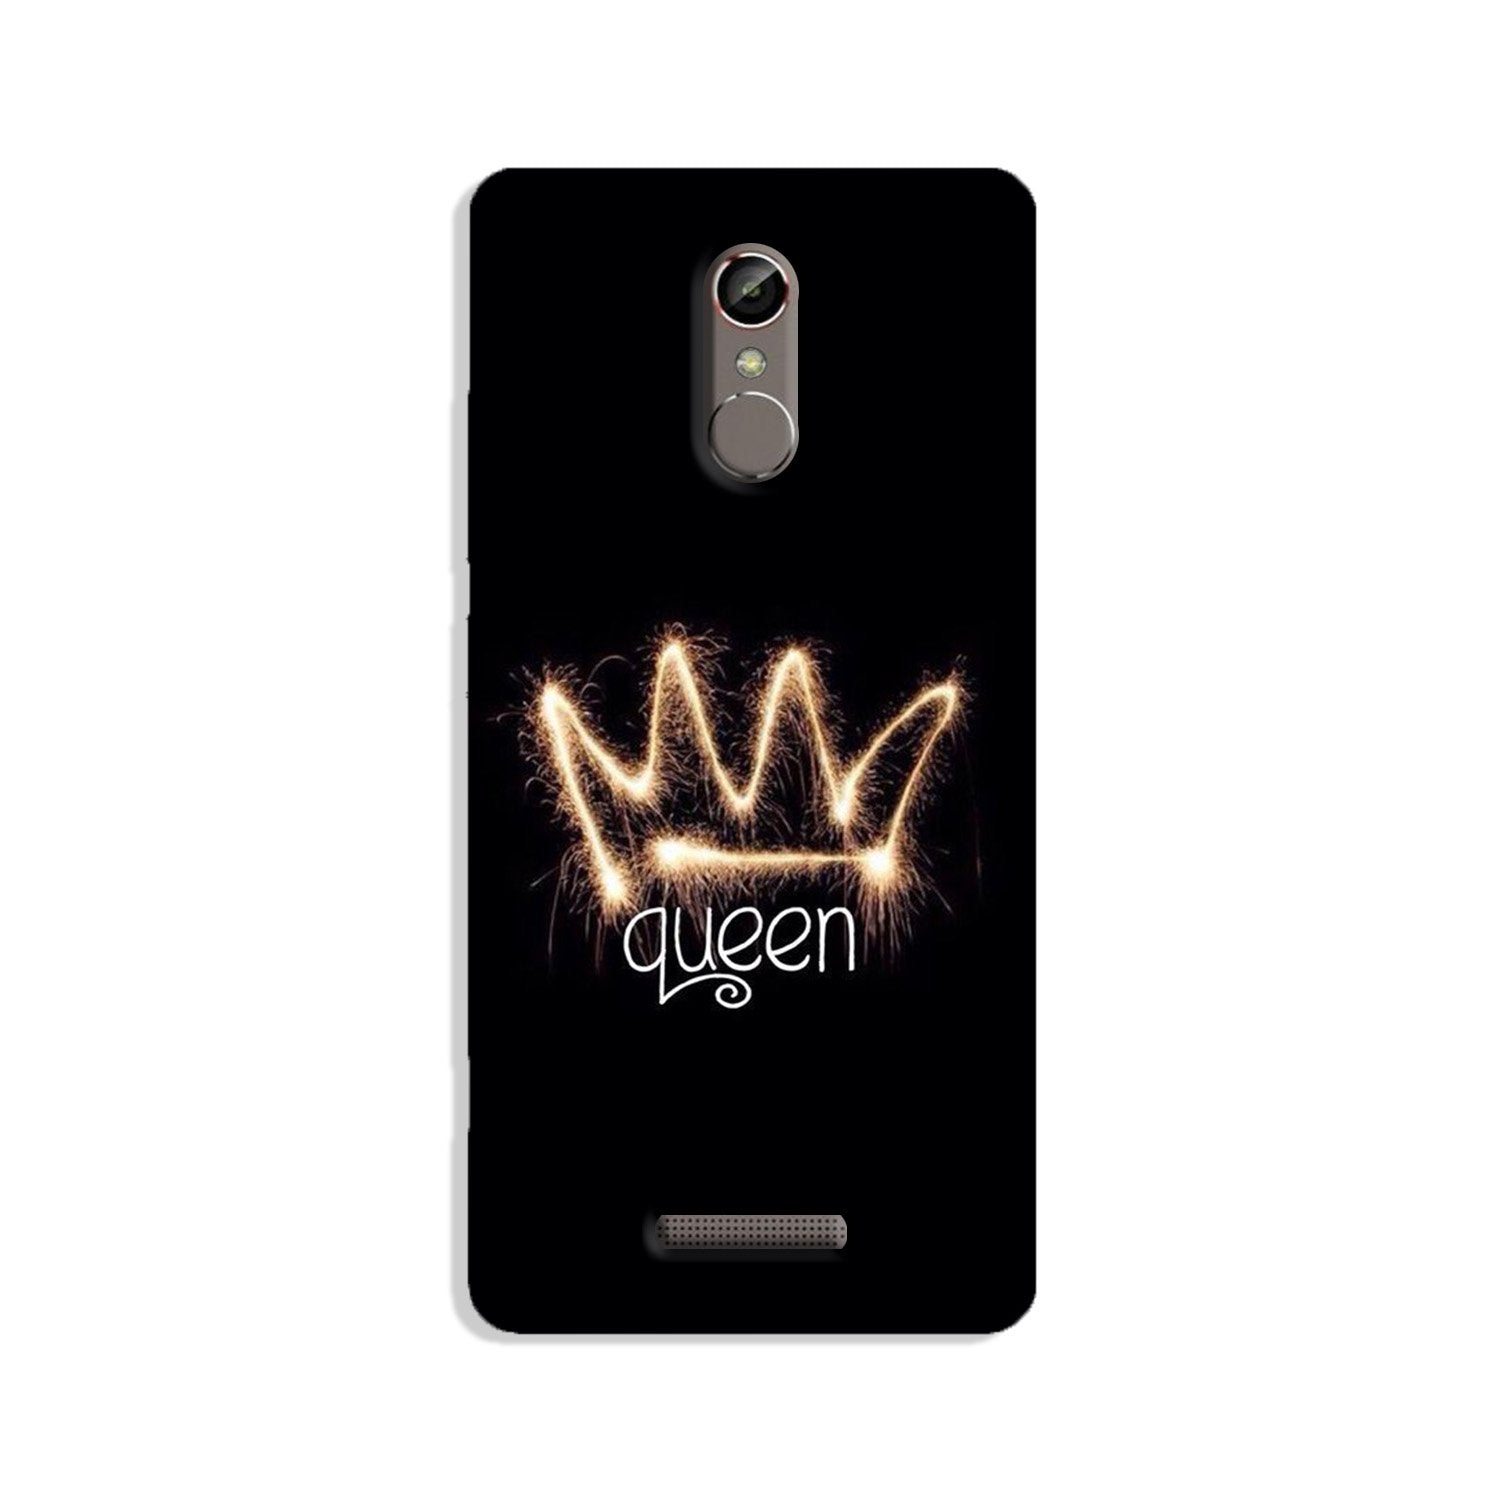 Queen Case for Gionee S6s (Design No. 270)